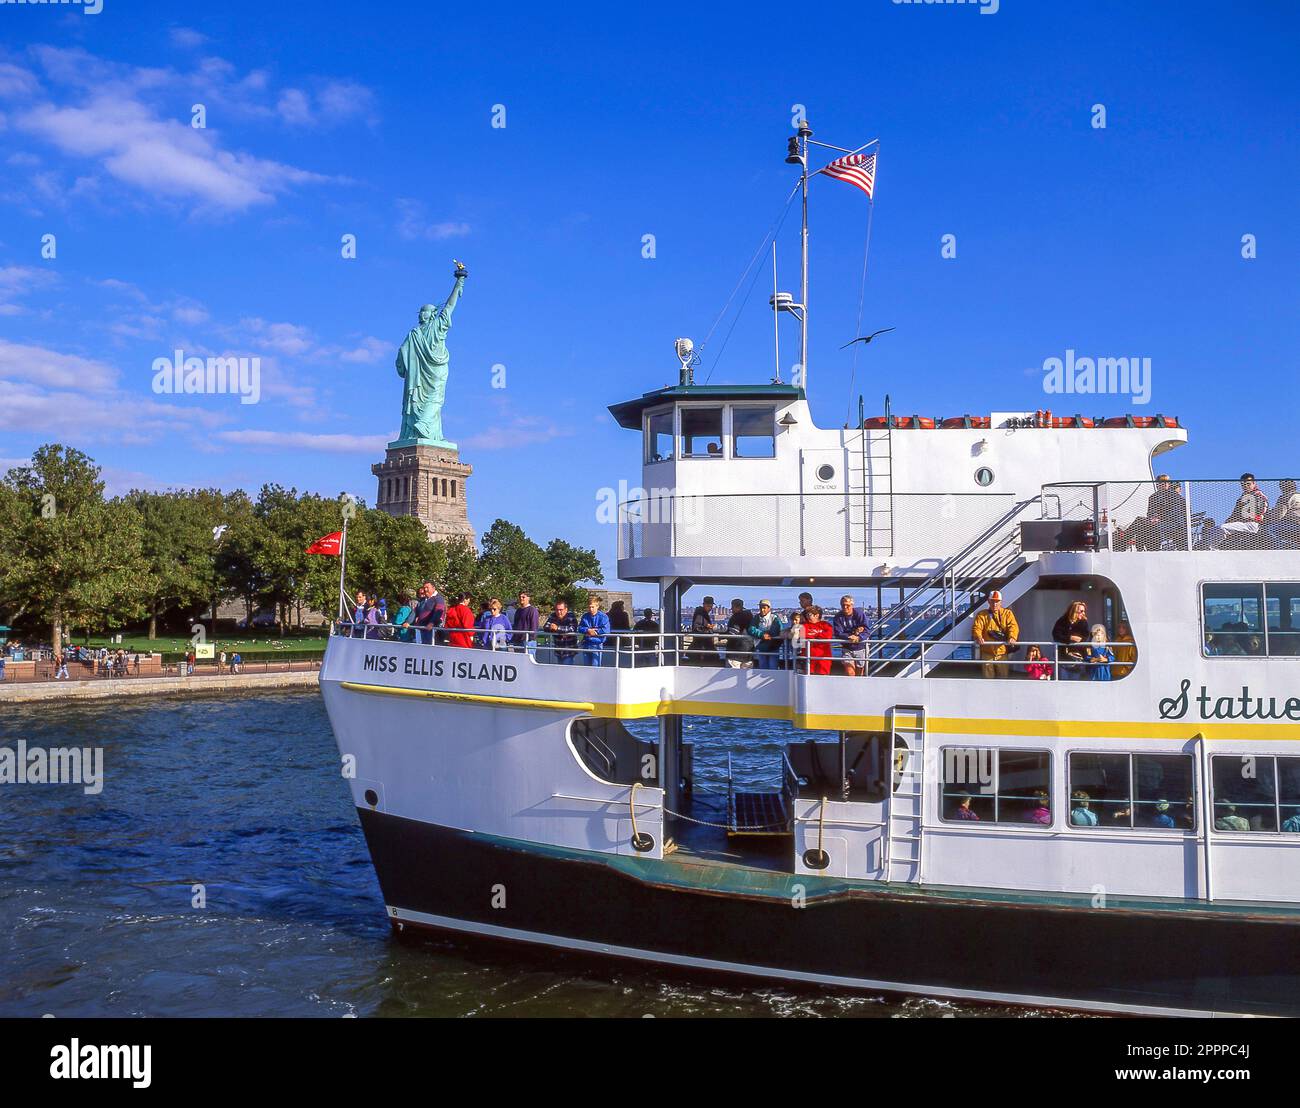 Miss Ellis Island Ferry passing Statue of Liberty National Monument, Liberty Island, New York, New York State, United States of America Stock Photo